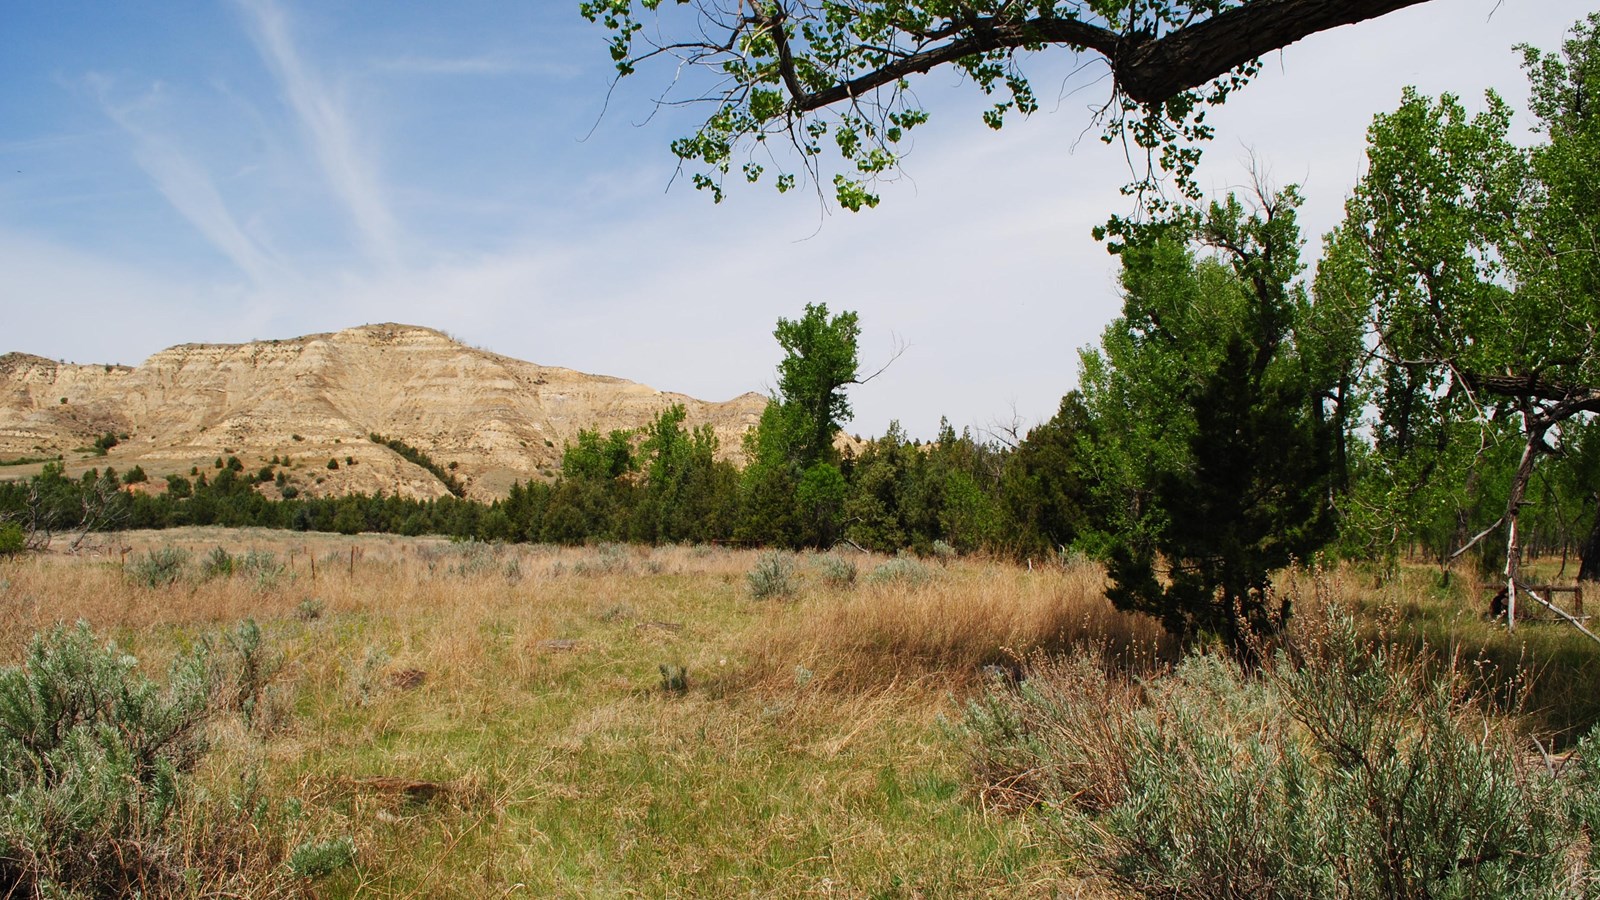 A view of a grassy field, with junipers in the background, as well as a butte under a blue sky.